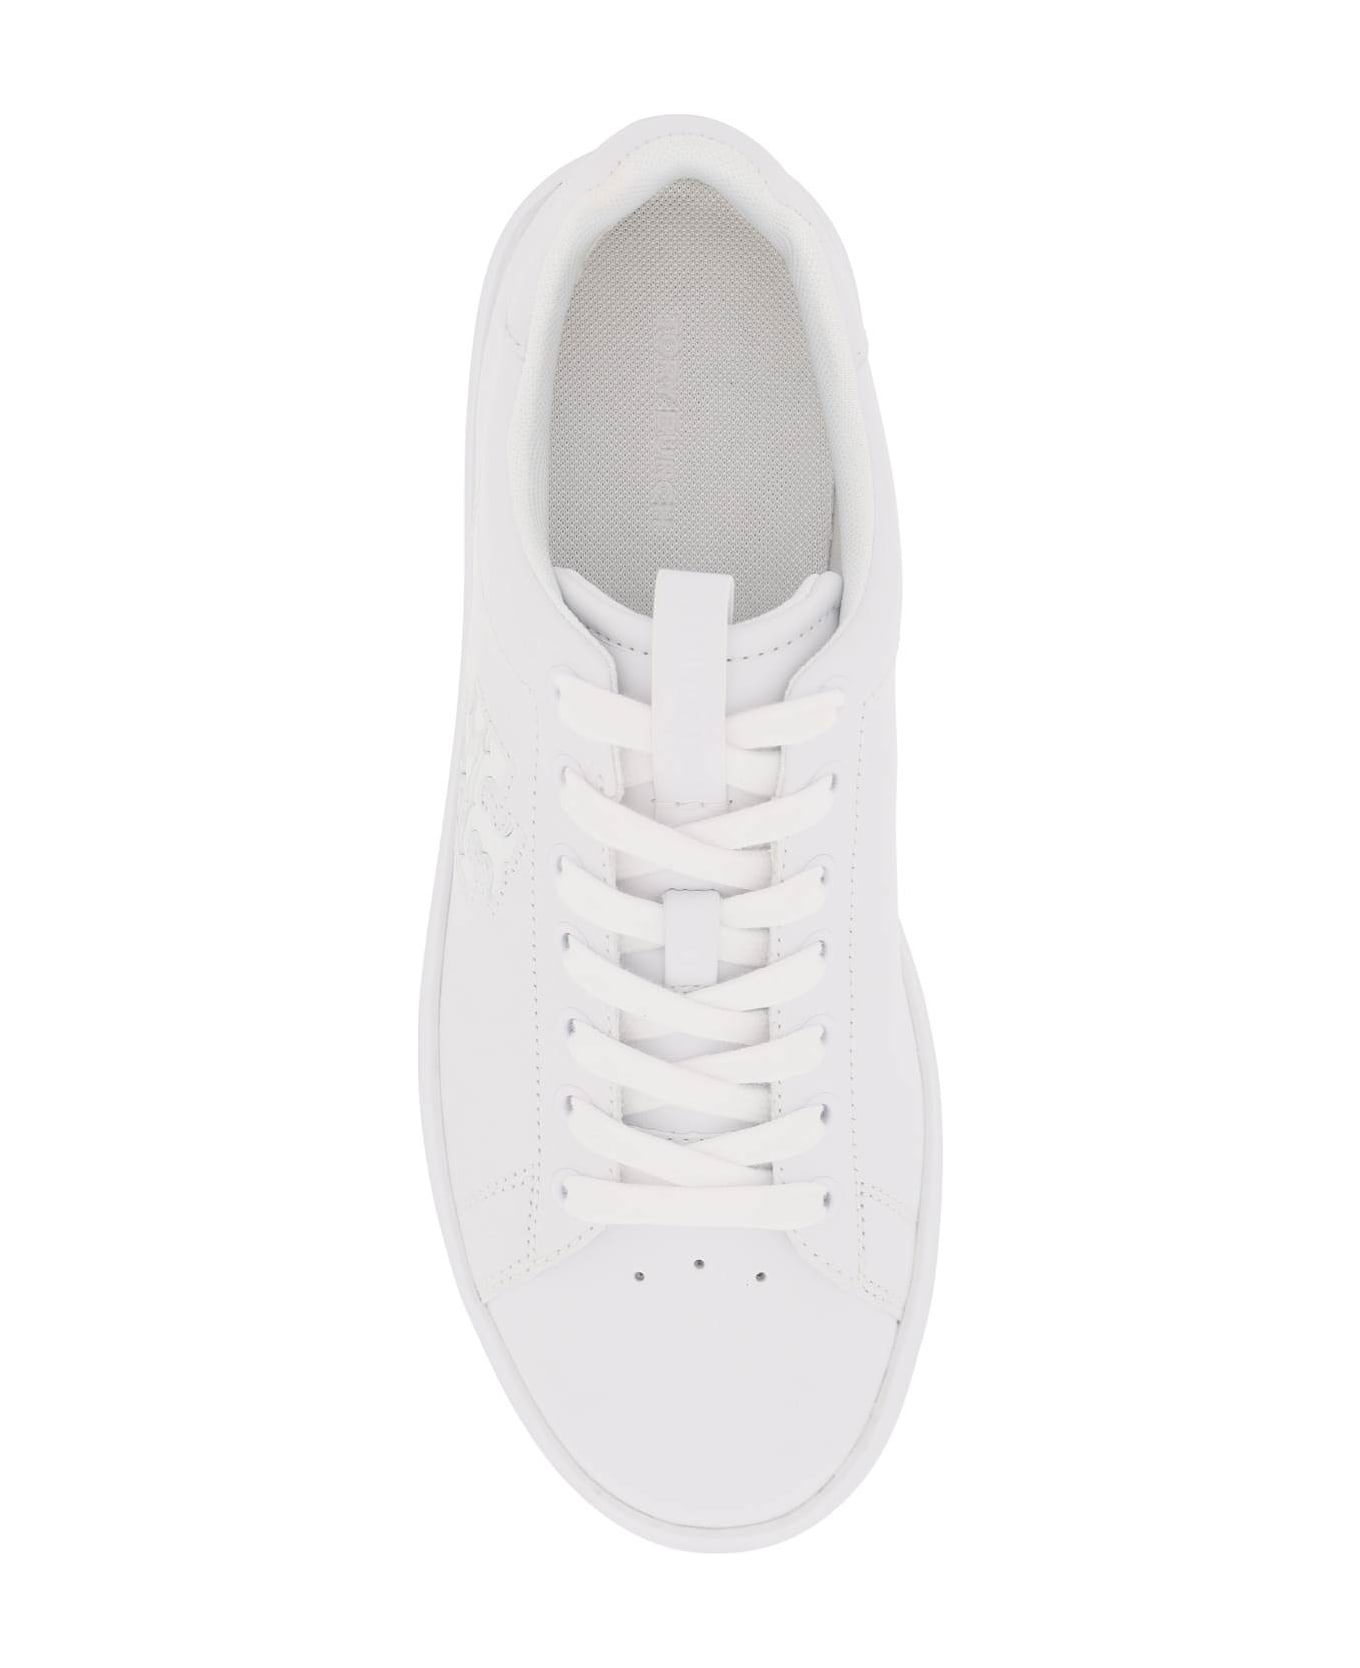 Tory Burch Double T Howell Court Leather Sneakers - White スニーカー